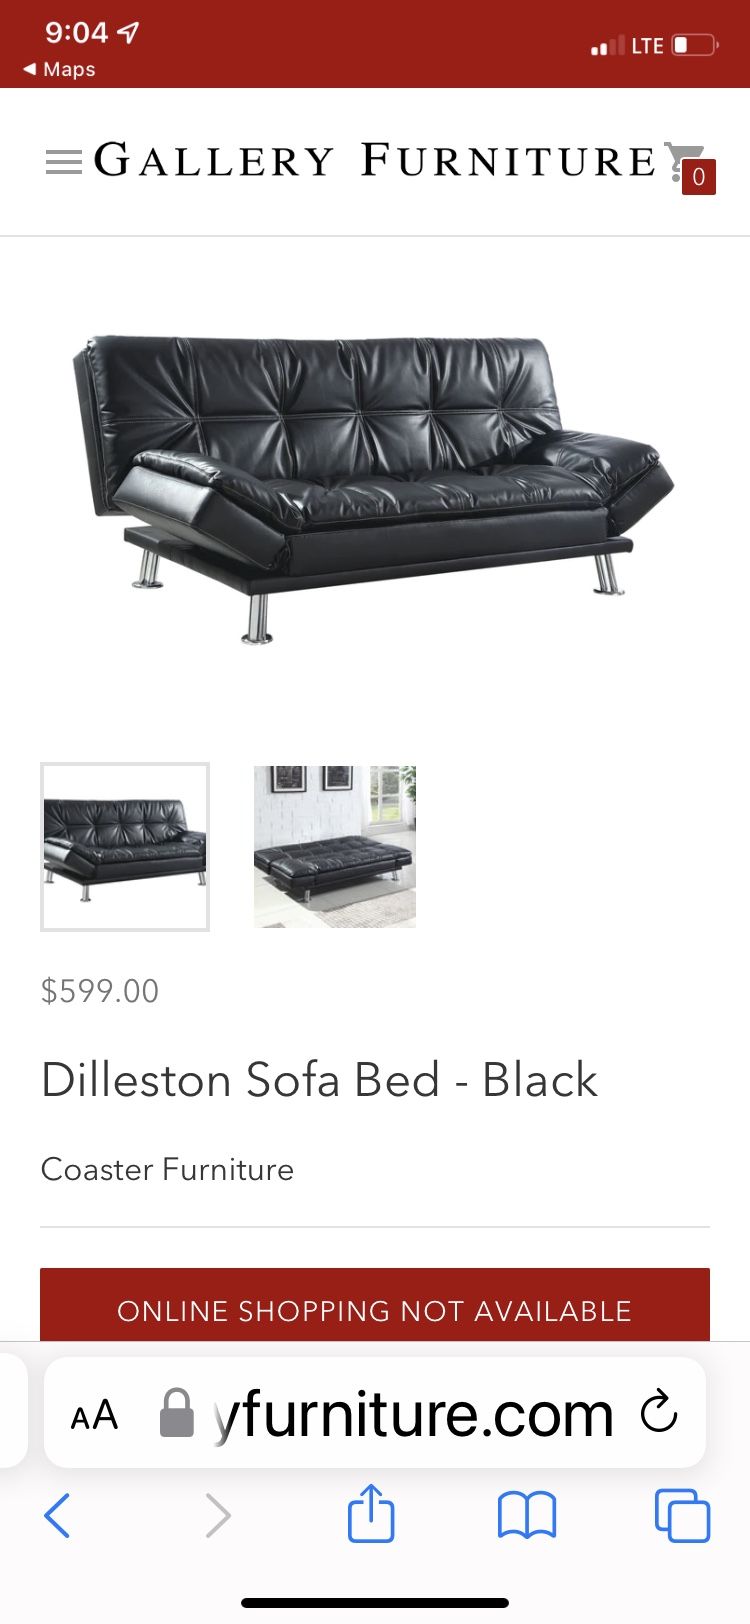 Top Of The Line Futon/offers